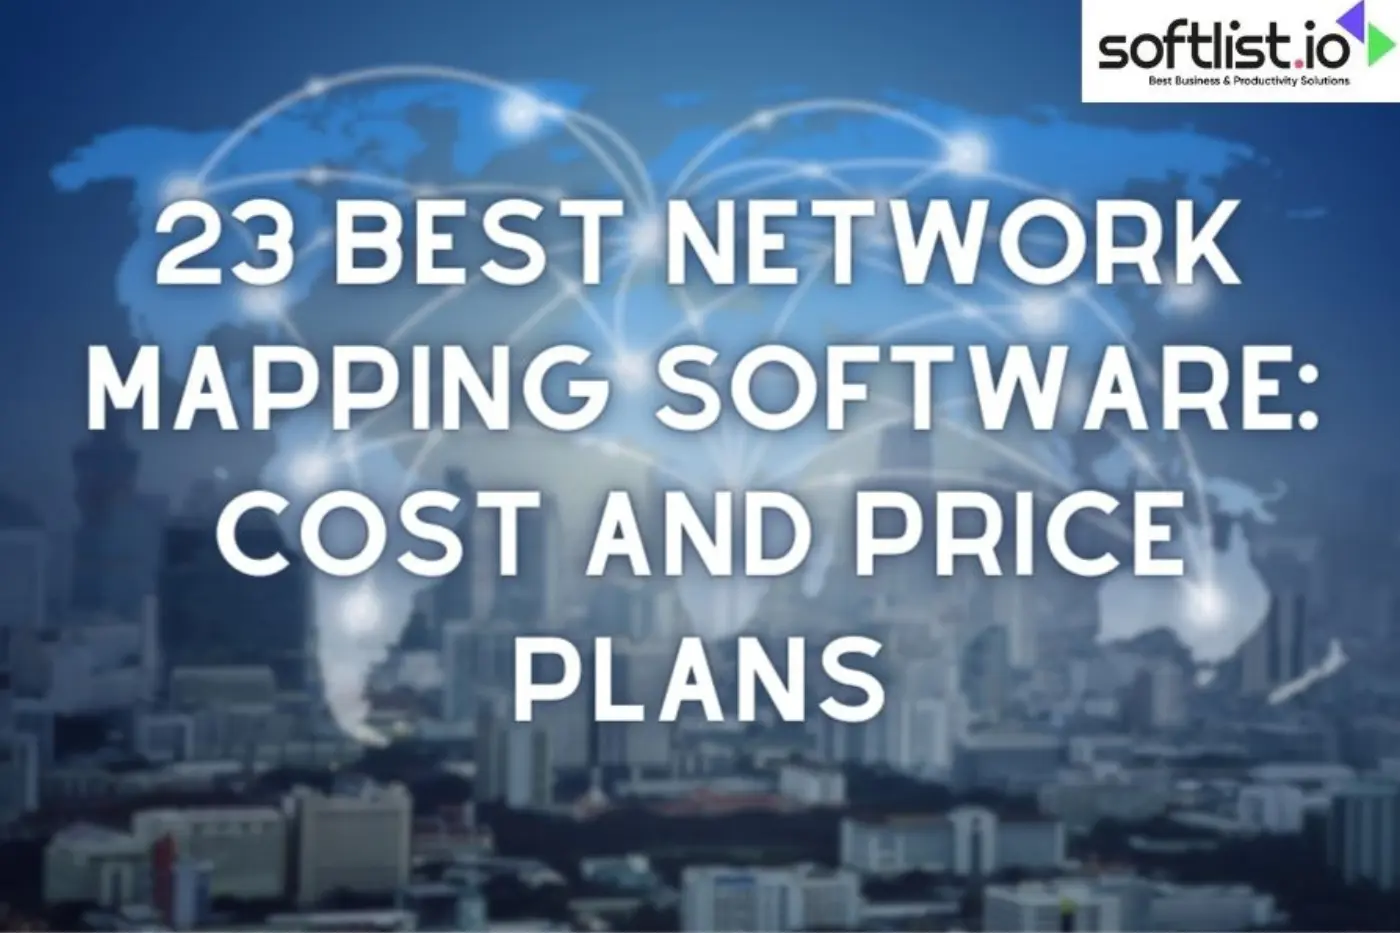 23 Best Network Mapping Software: Cost and Price Plans